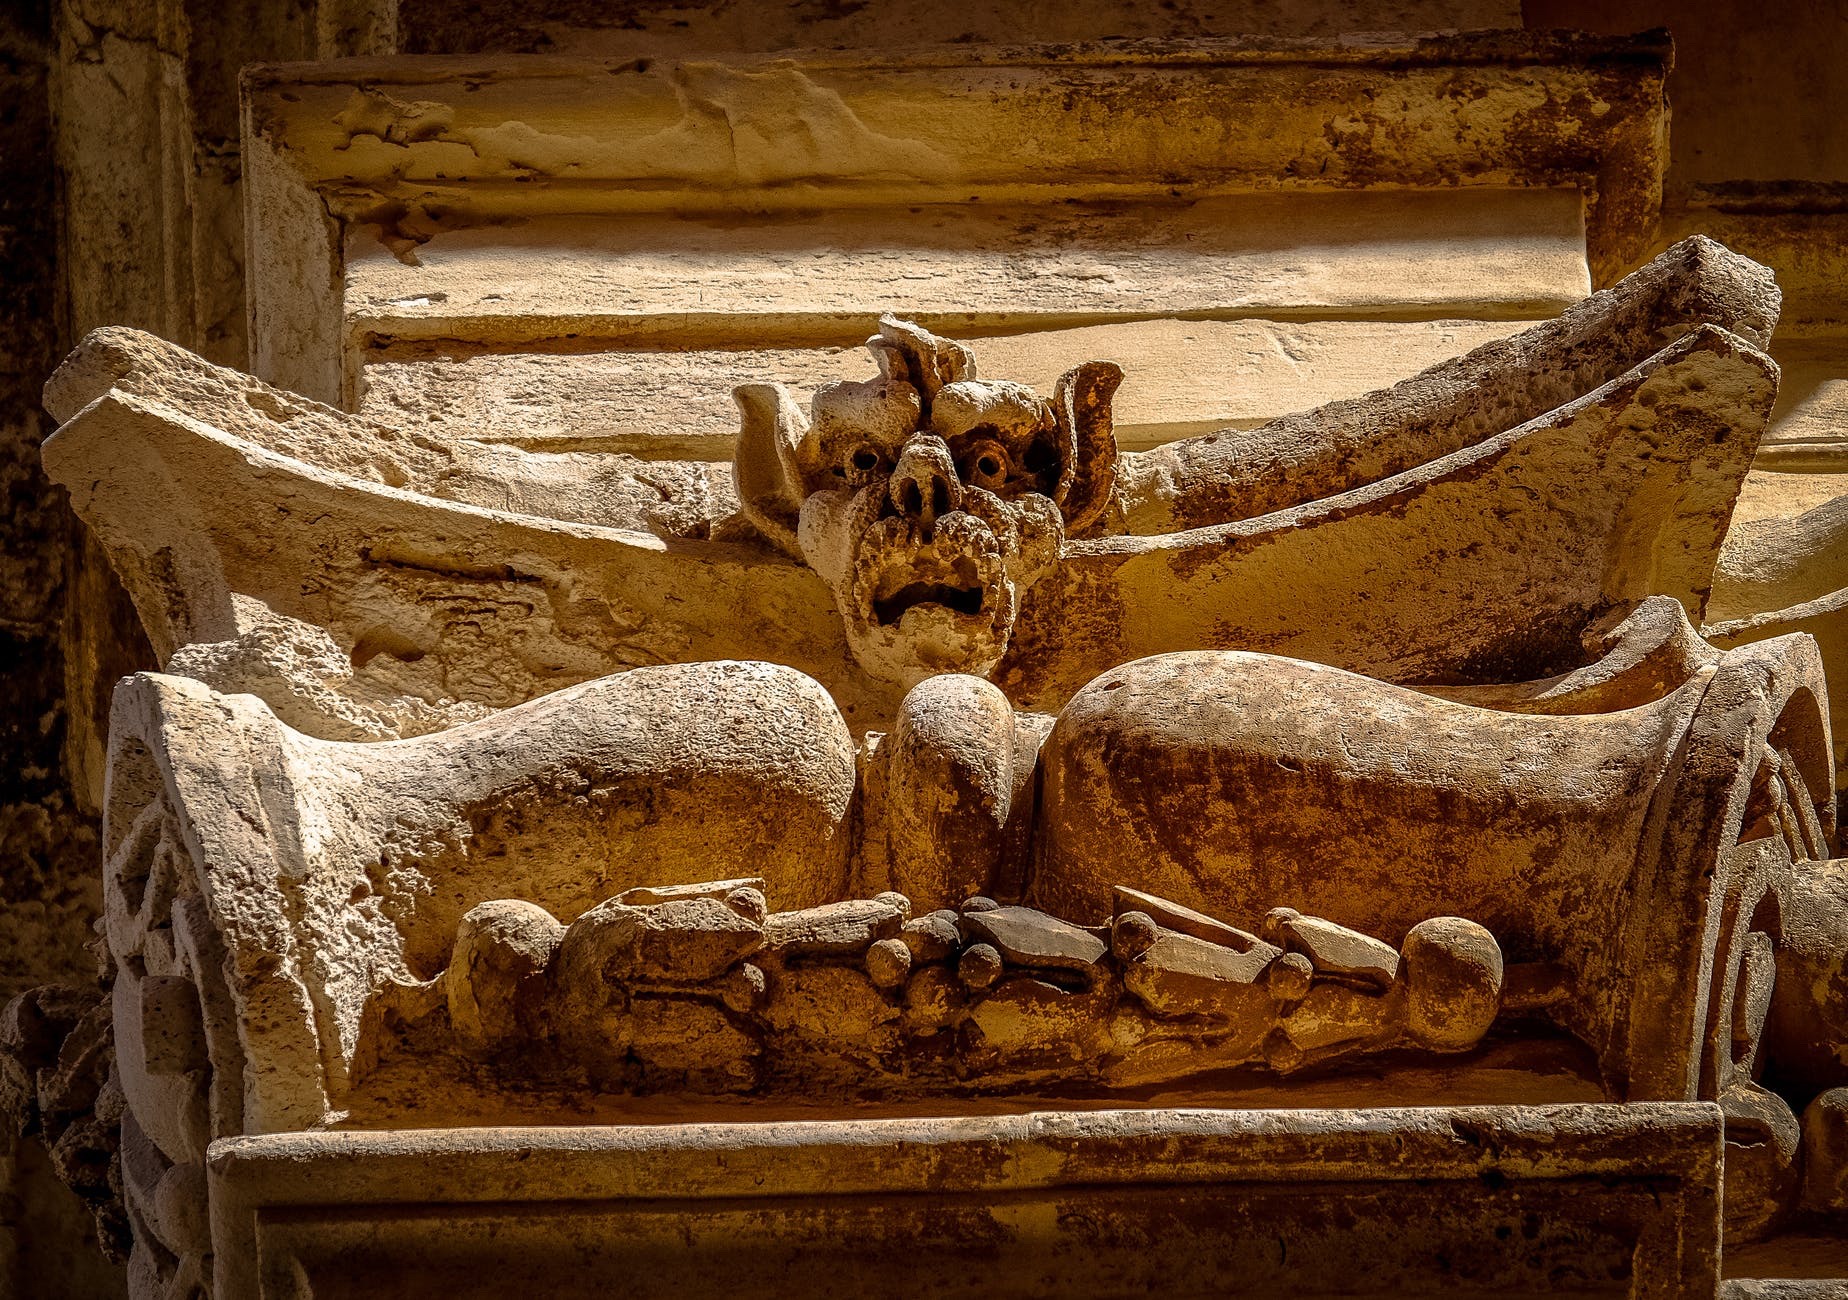 Gargoyles - Those evil looking creatures you usually see on buildings that was said to keep evil spirits away also served another purpose. #Gargoyles (Pexels image)